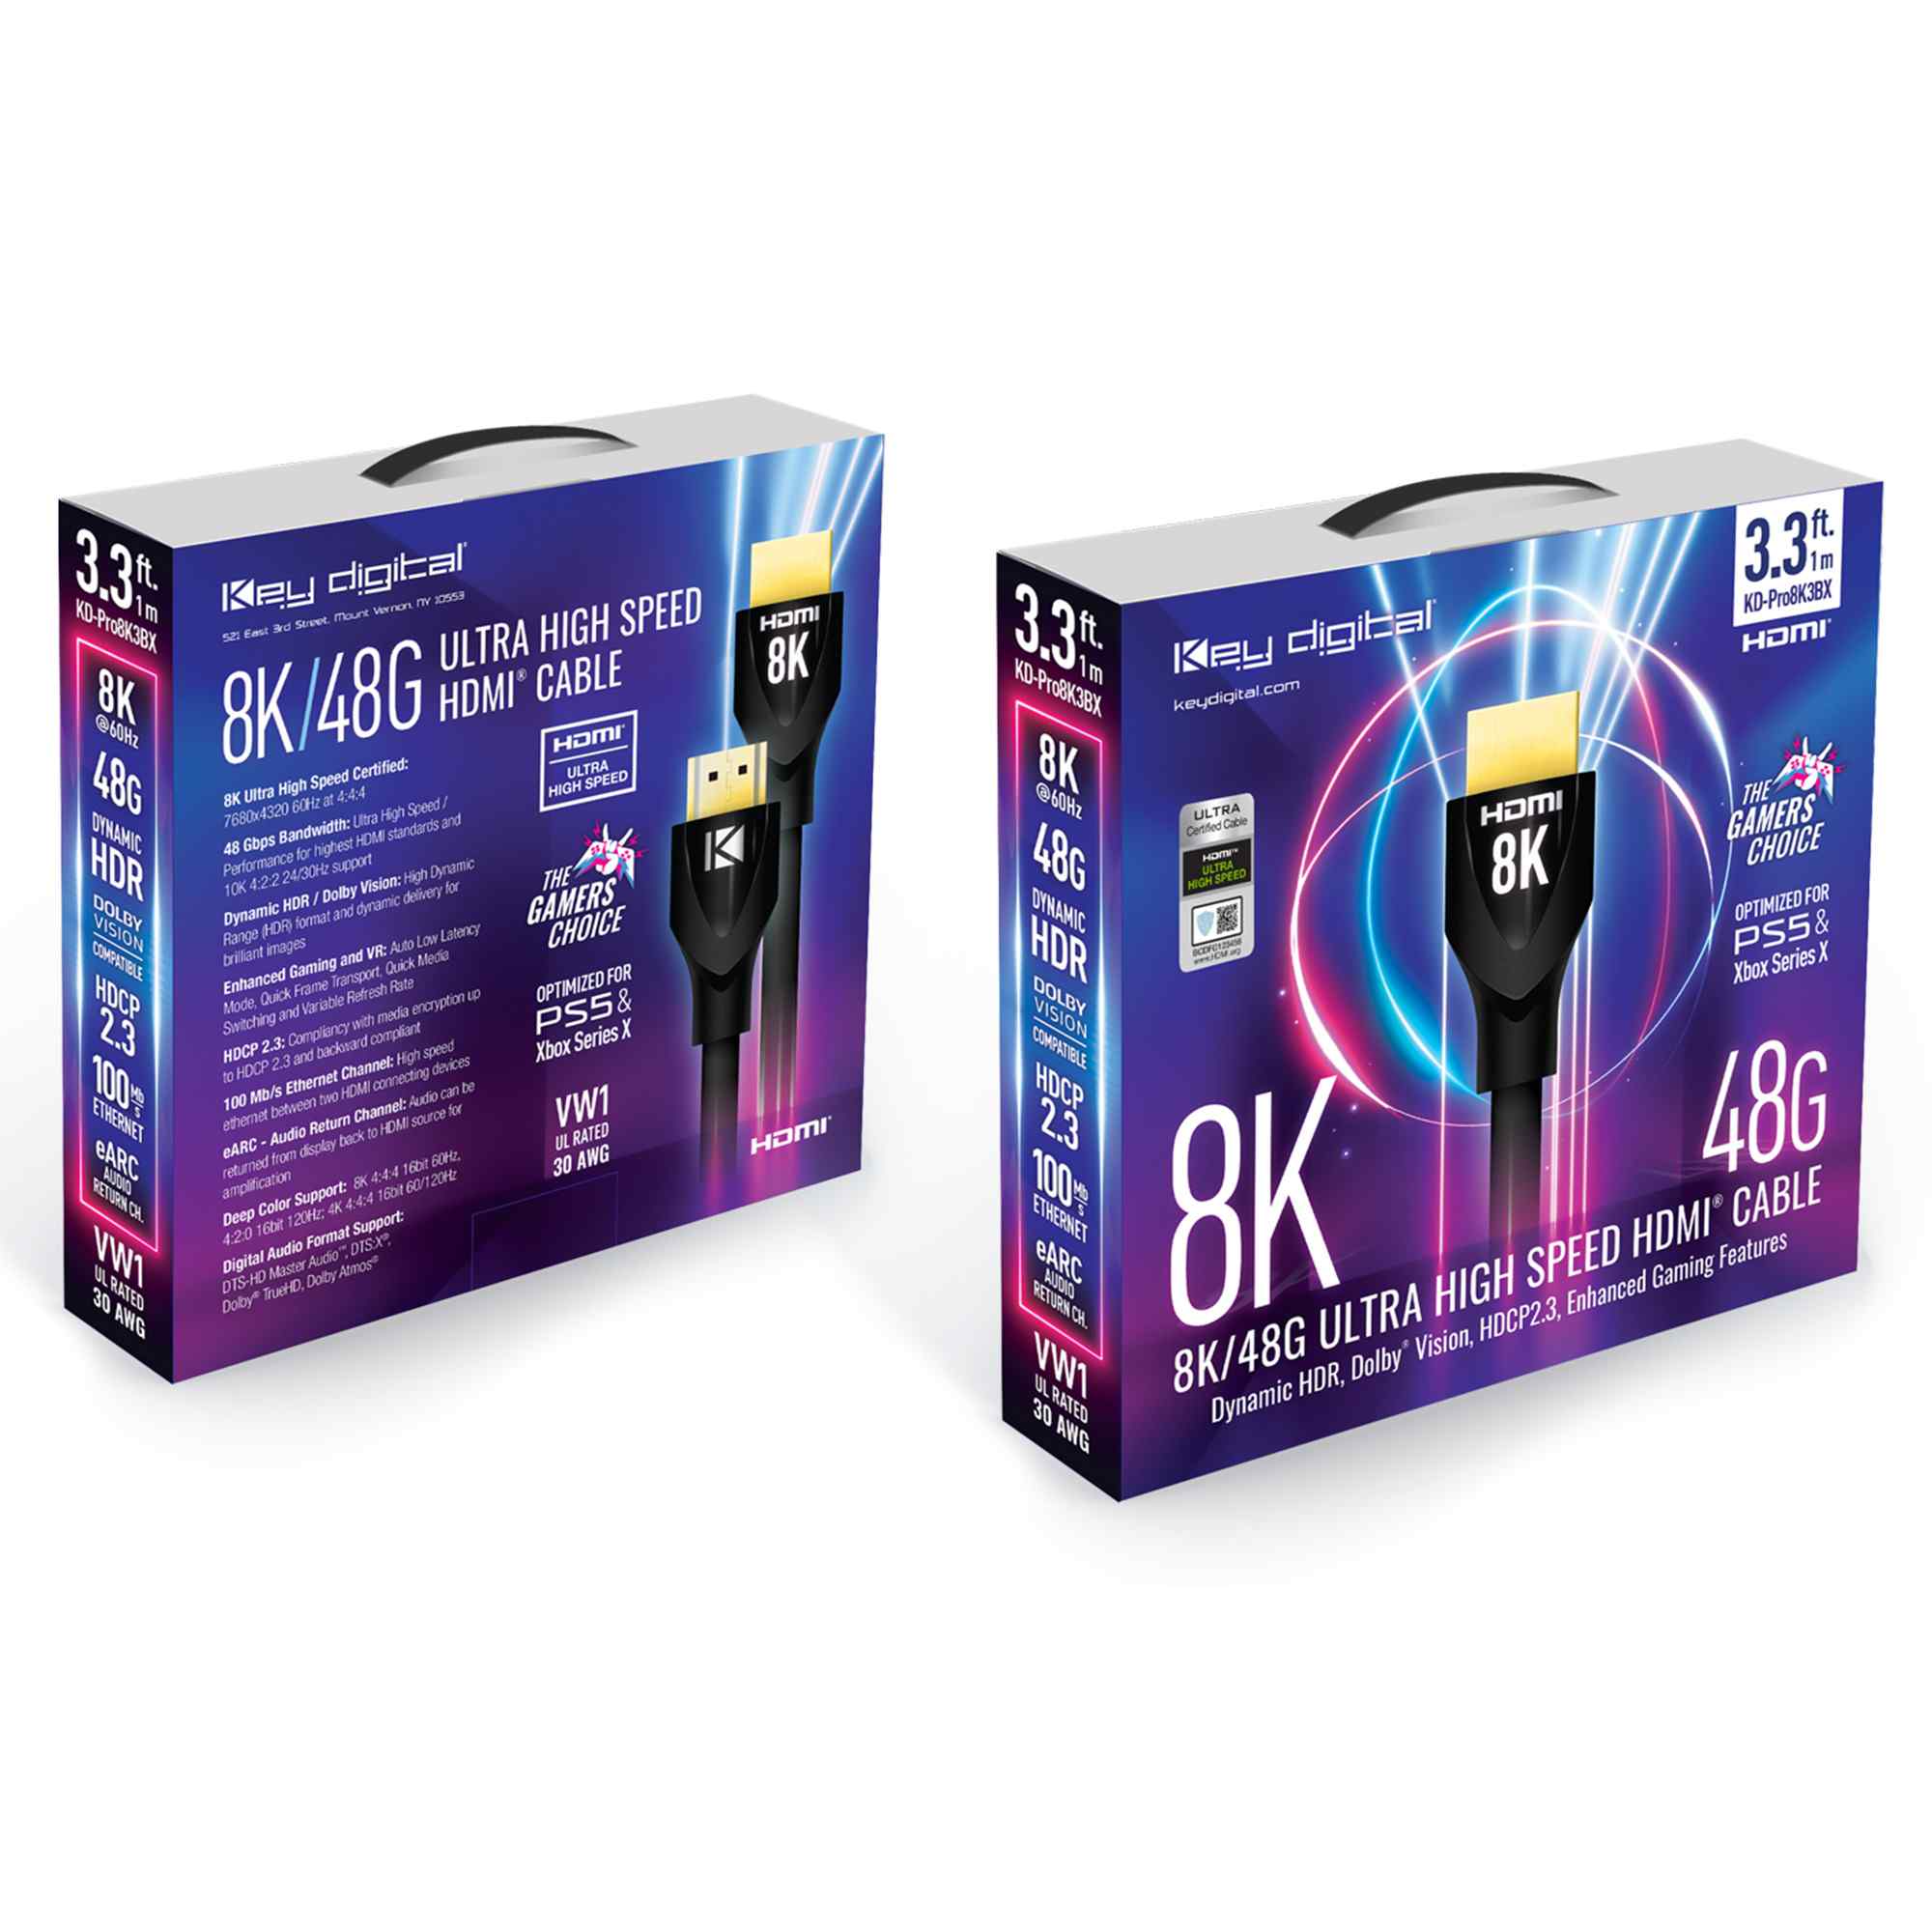 Thumbnail of key Digital ultra high speed hdmi cable Packaging